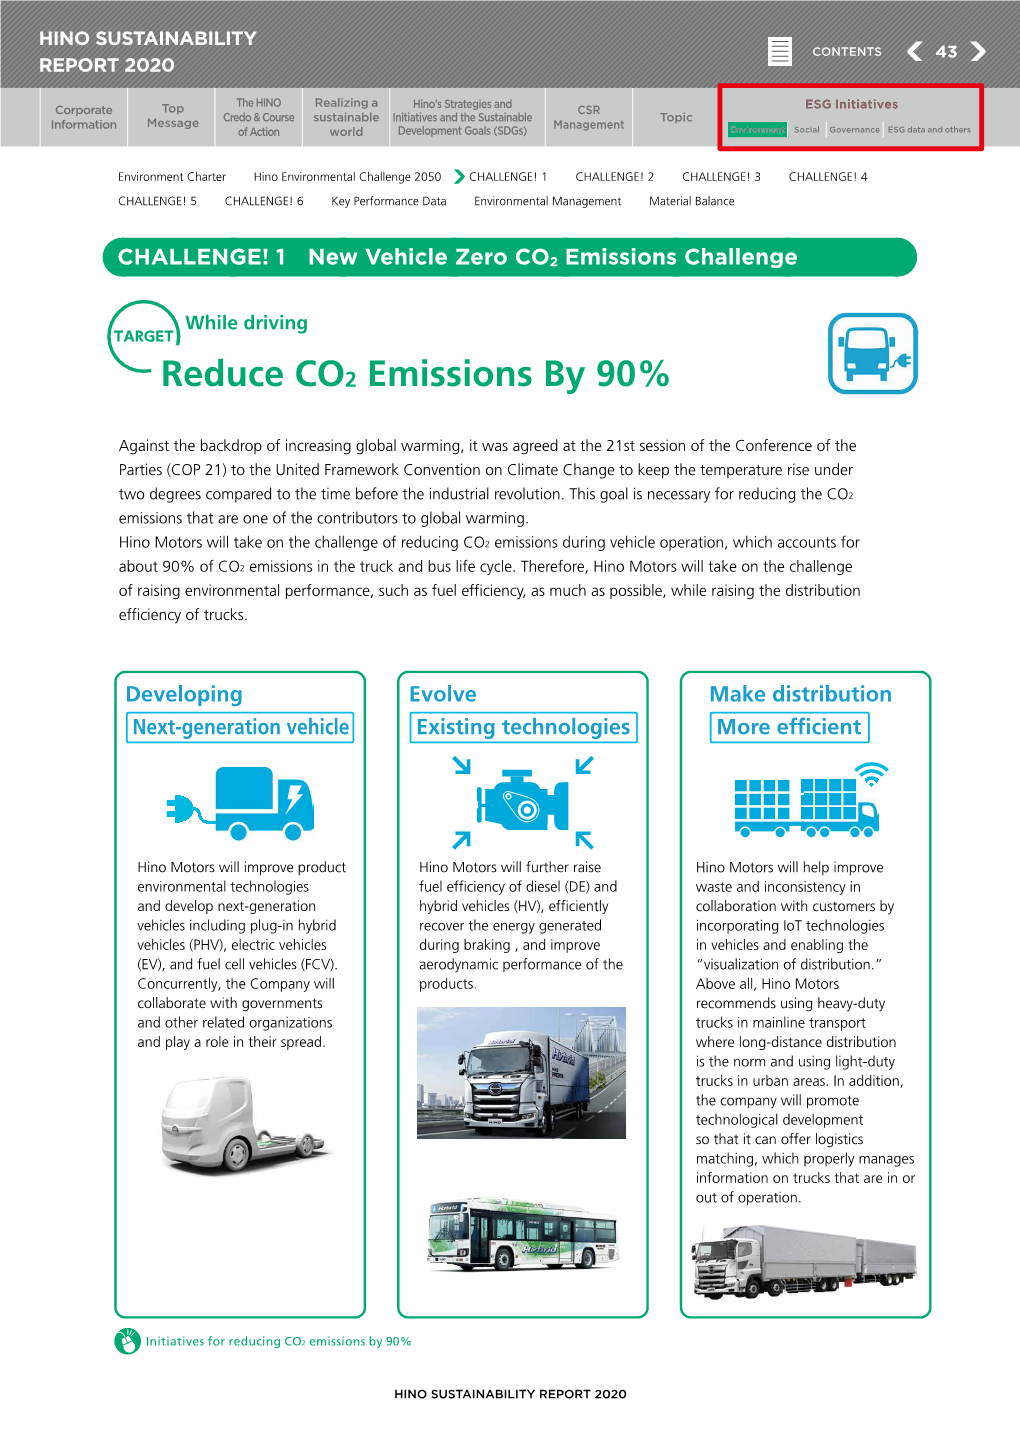 Reduce CO2 Emissions by 90%